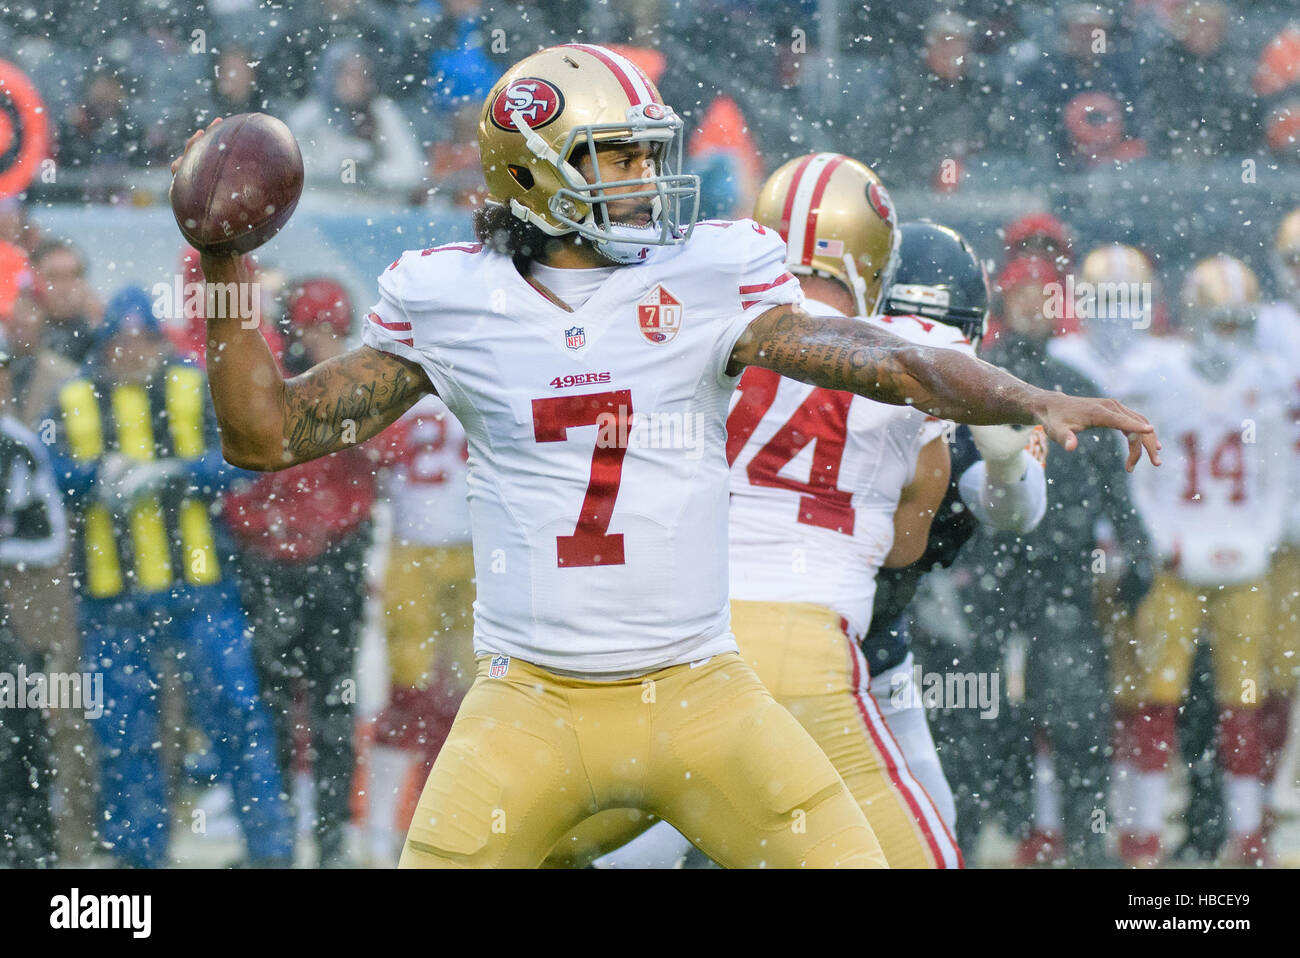 Chicago, USA. 4th December, 2016. San Francisco 49ers Quarterback Colin Kaepernick (7) passes the ball in the 1st quarter during an NFL football game between the San Francisco 49ers and the Chicago Bears at Soldier Field in Chicago, IL. © Action Plus Sports Images/Alamy Live News Stock Photo